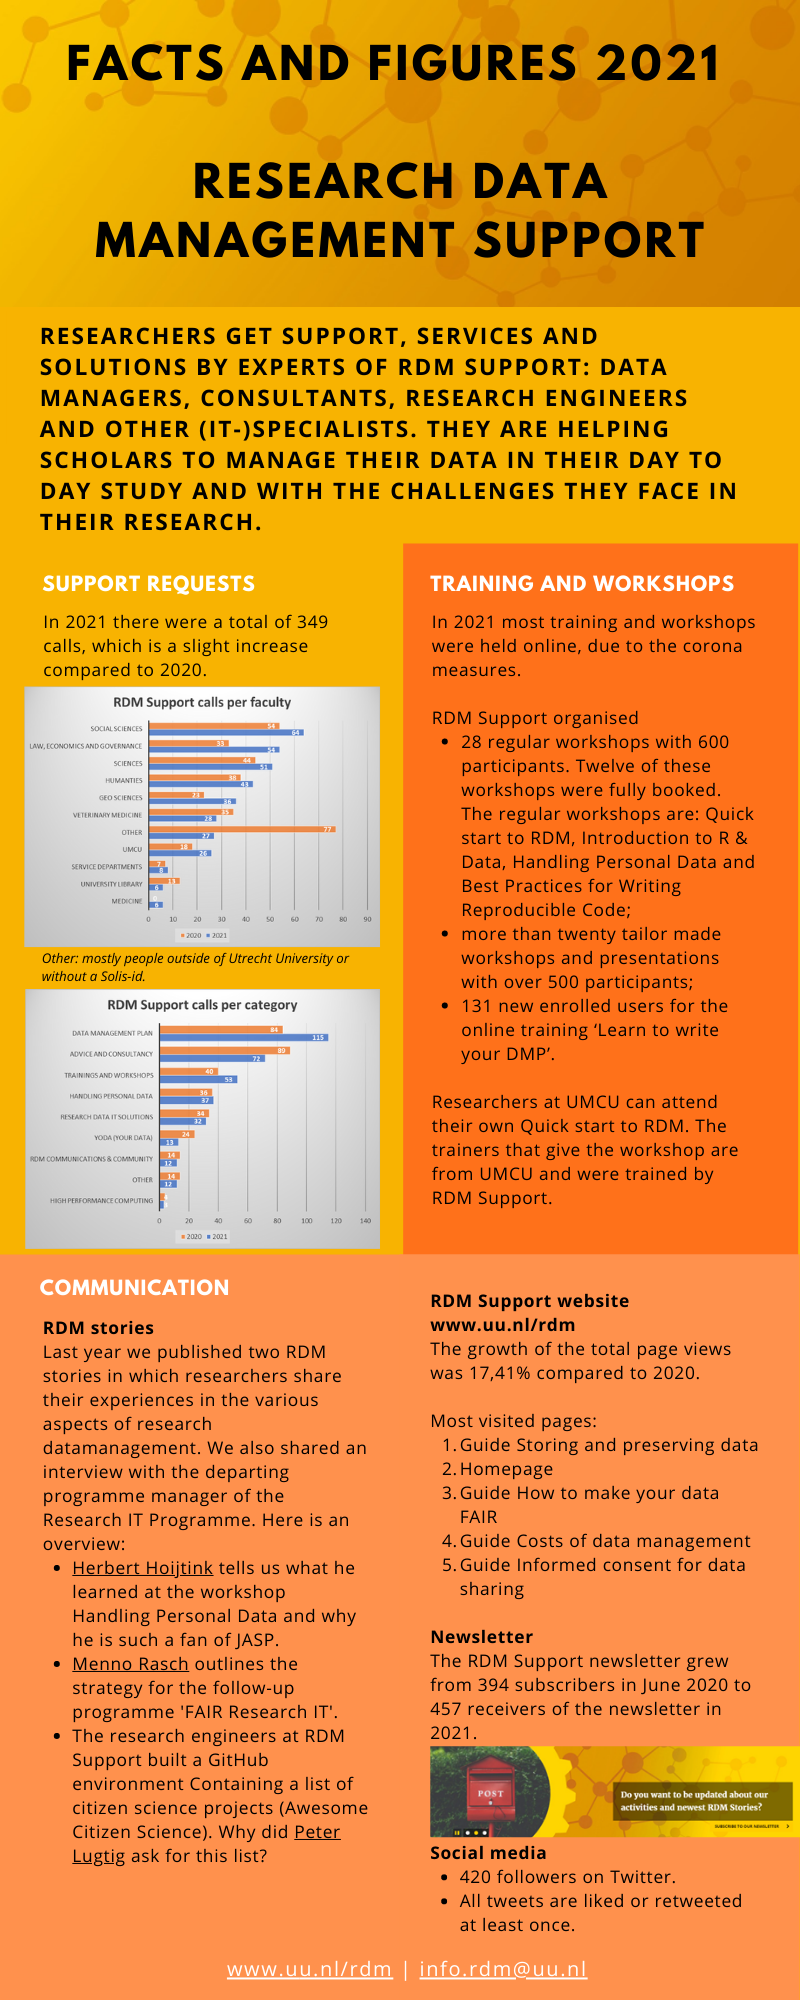 First page of the Facts & Figures 2021 of Research Data Management Support